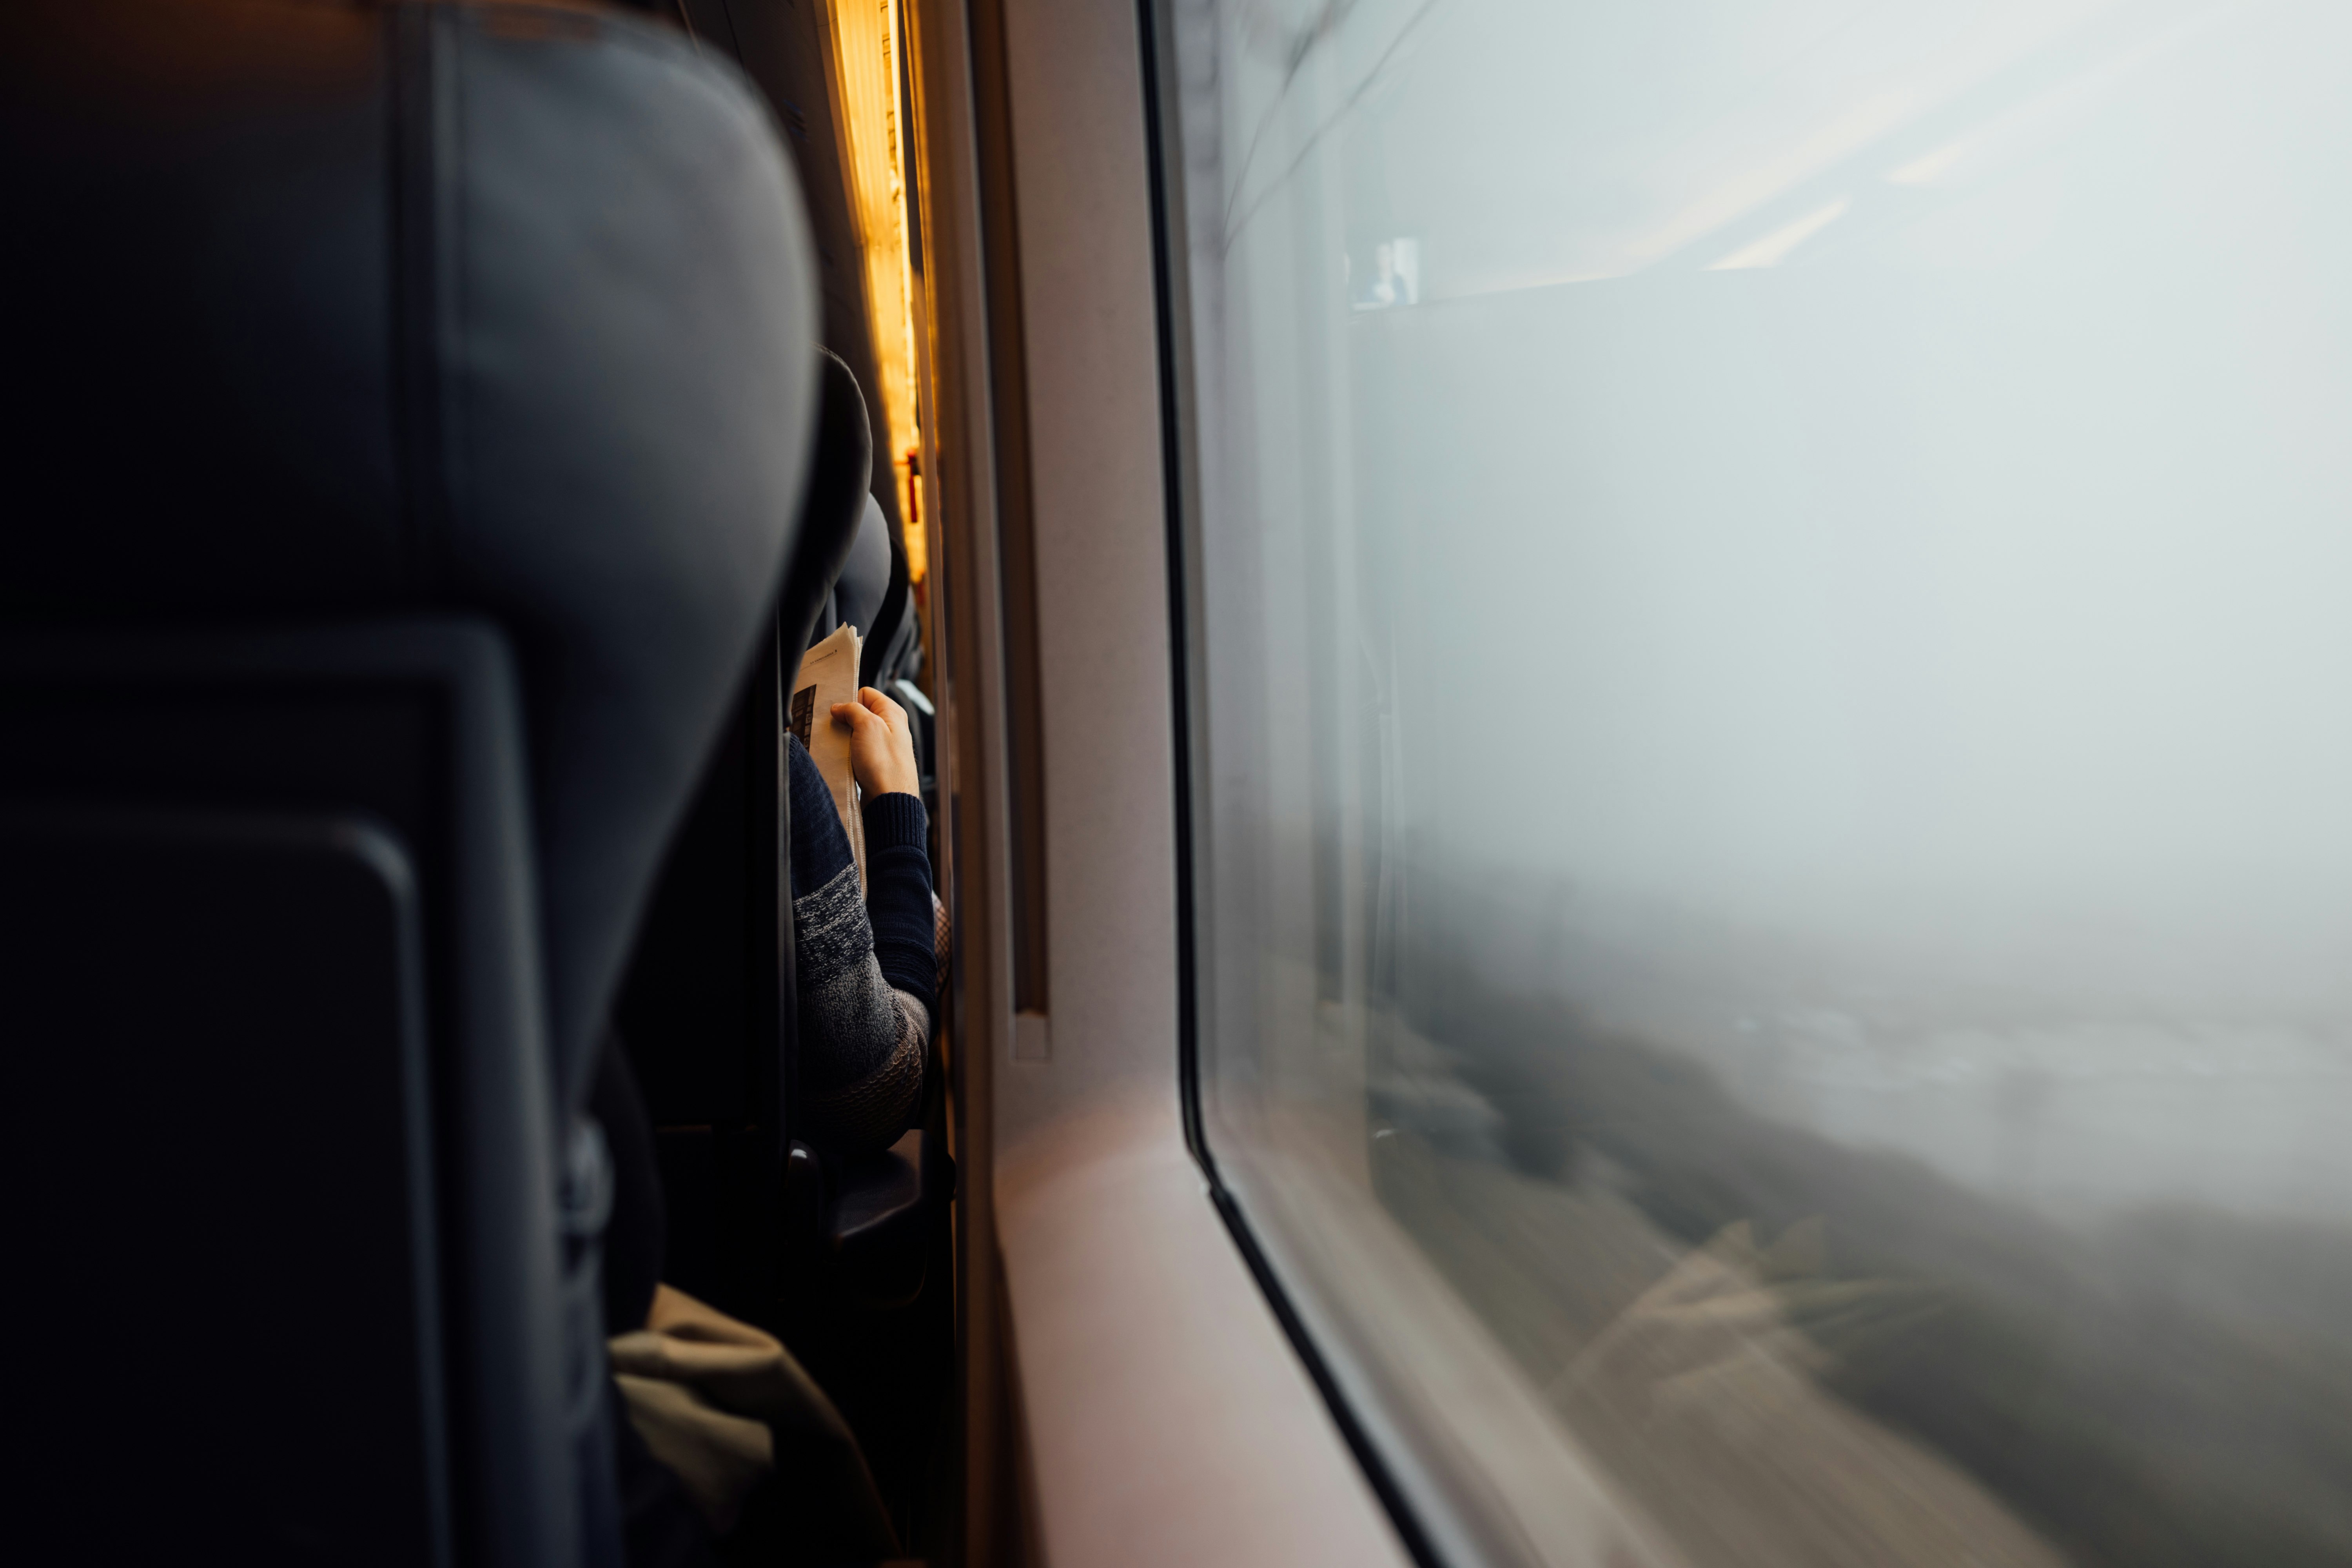 Person reading newspaper from behind with headrest in foreground near train carriage window